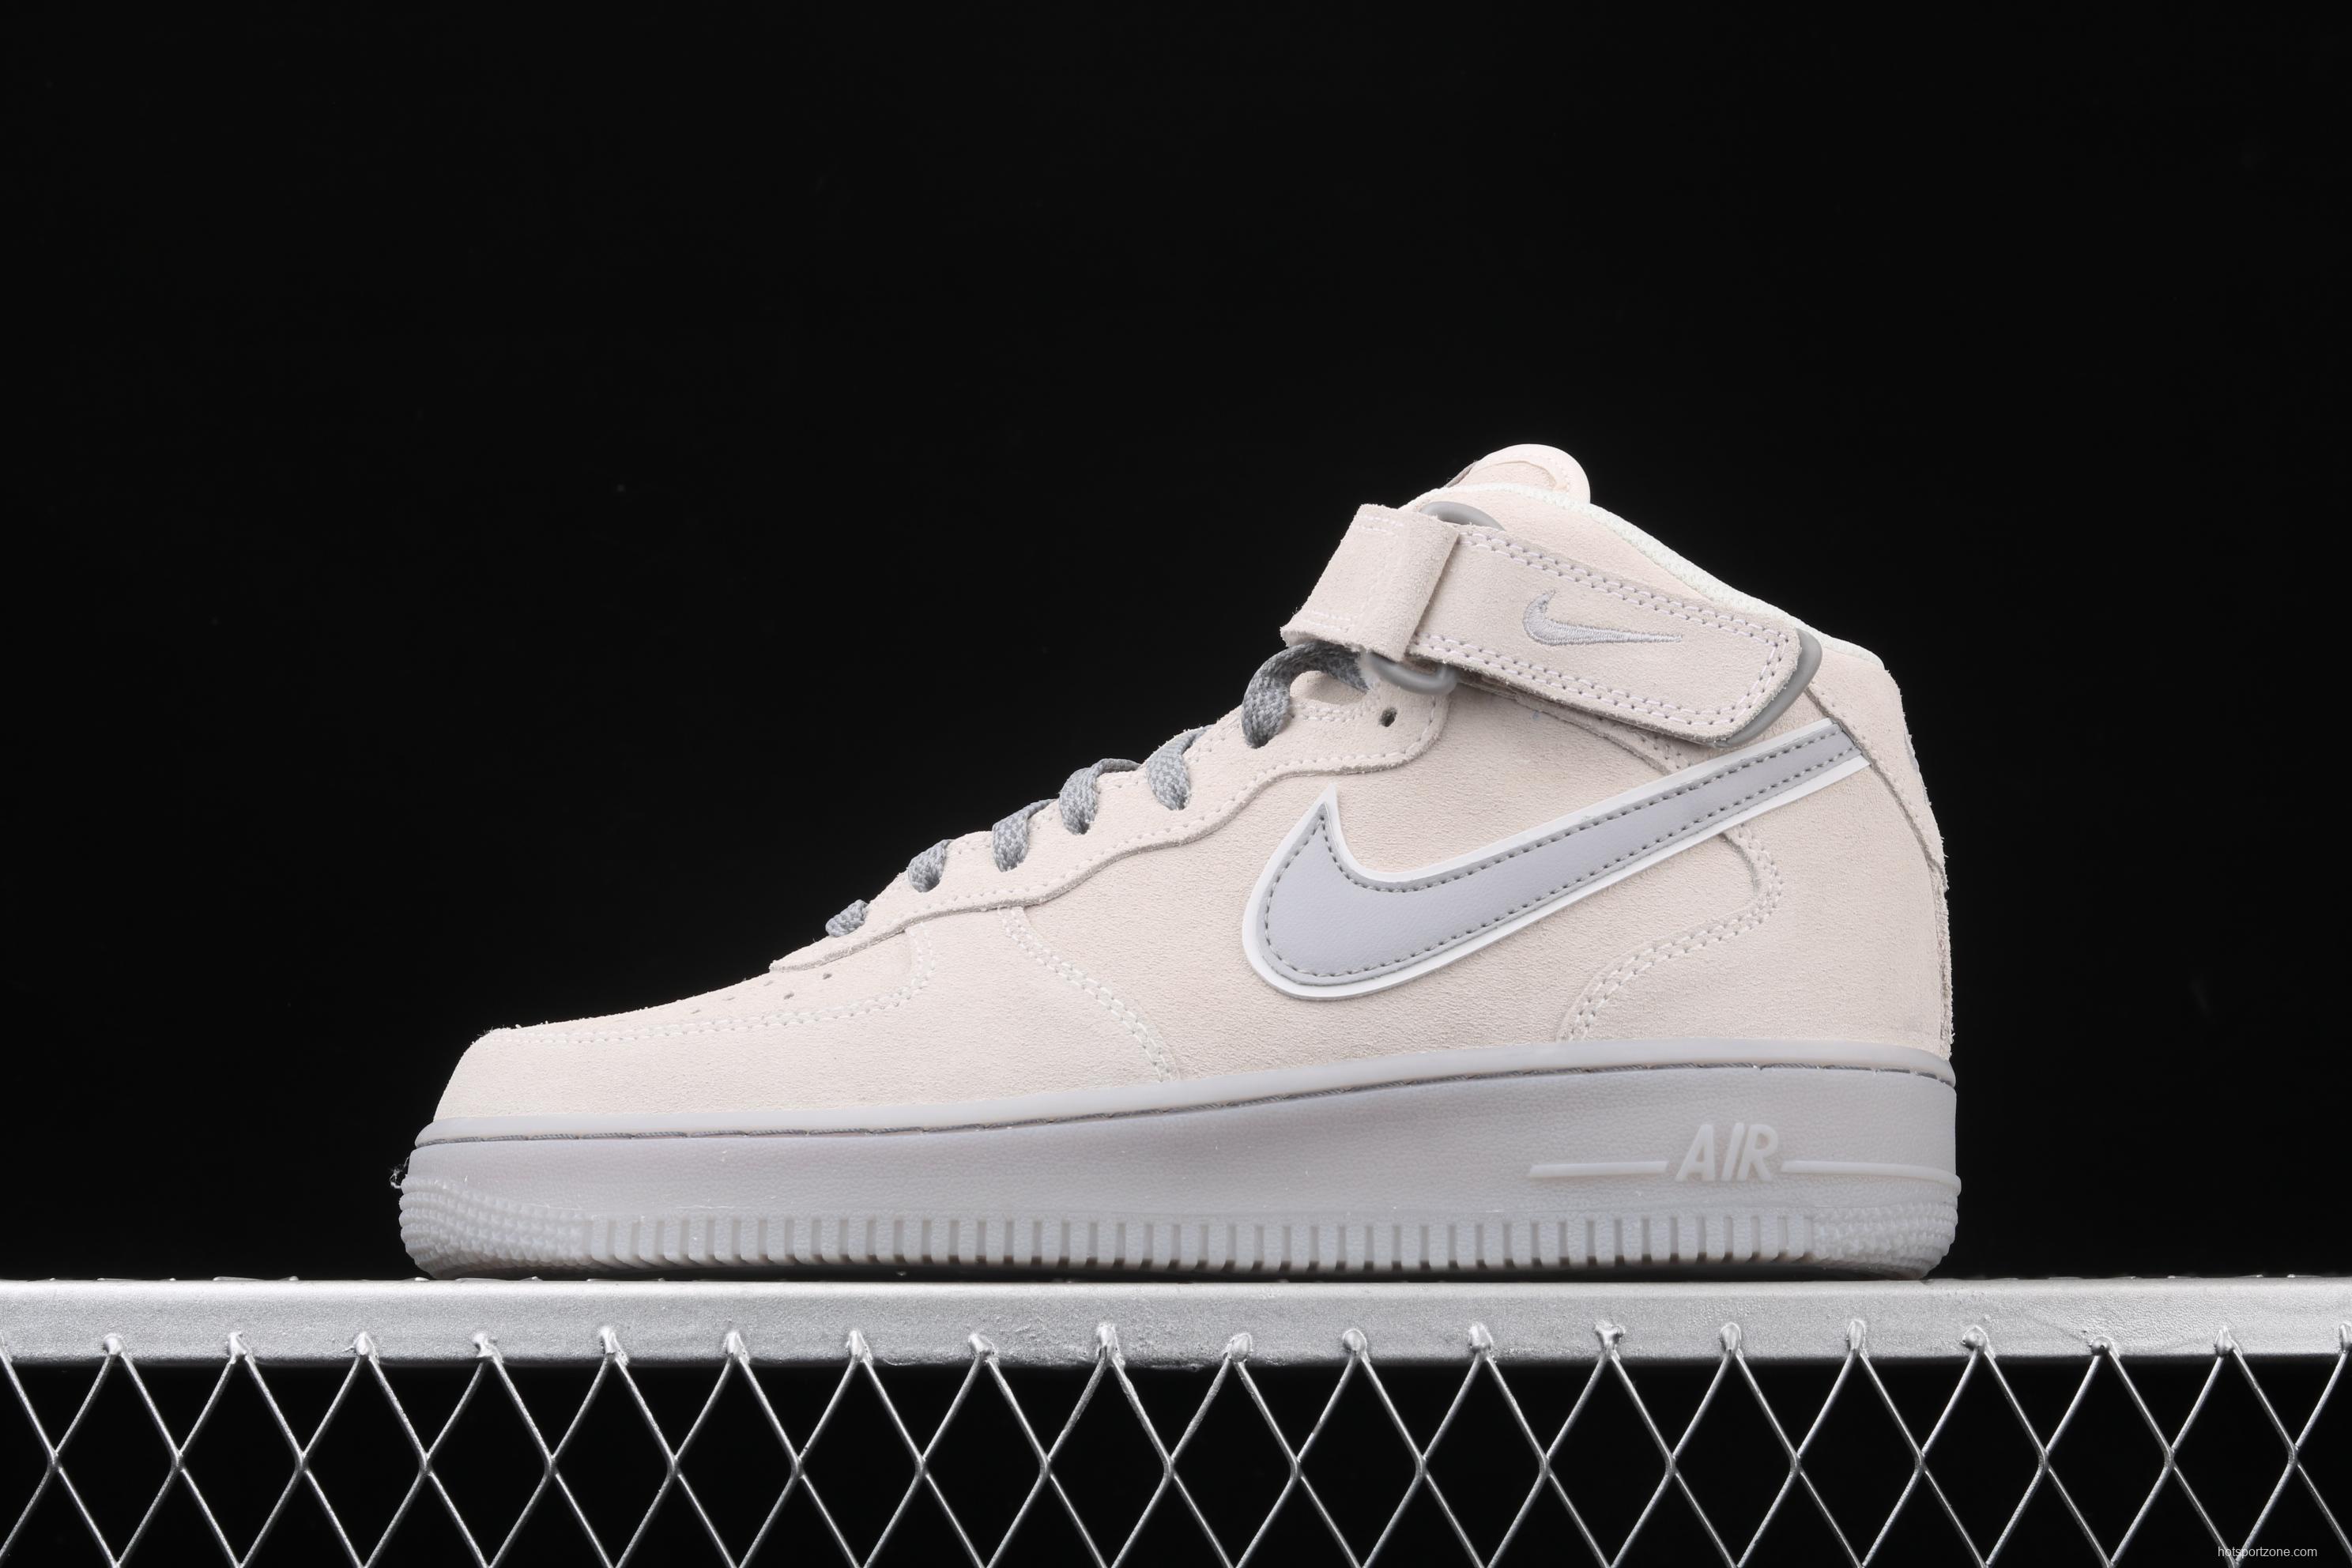 NIKE Air Force 1x 07 Mid air force light blue gray suede 3m reflective Zhongbang leisure board shoes 315123-002